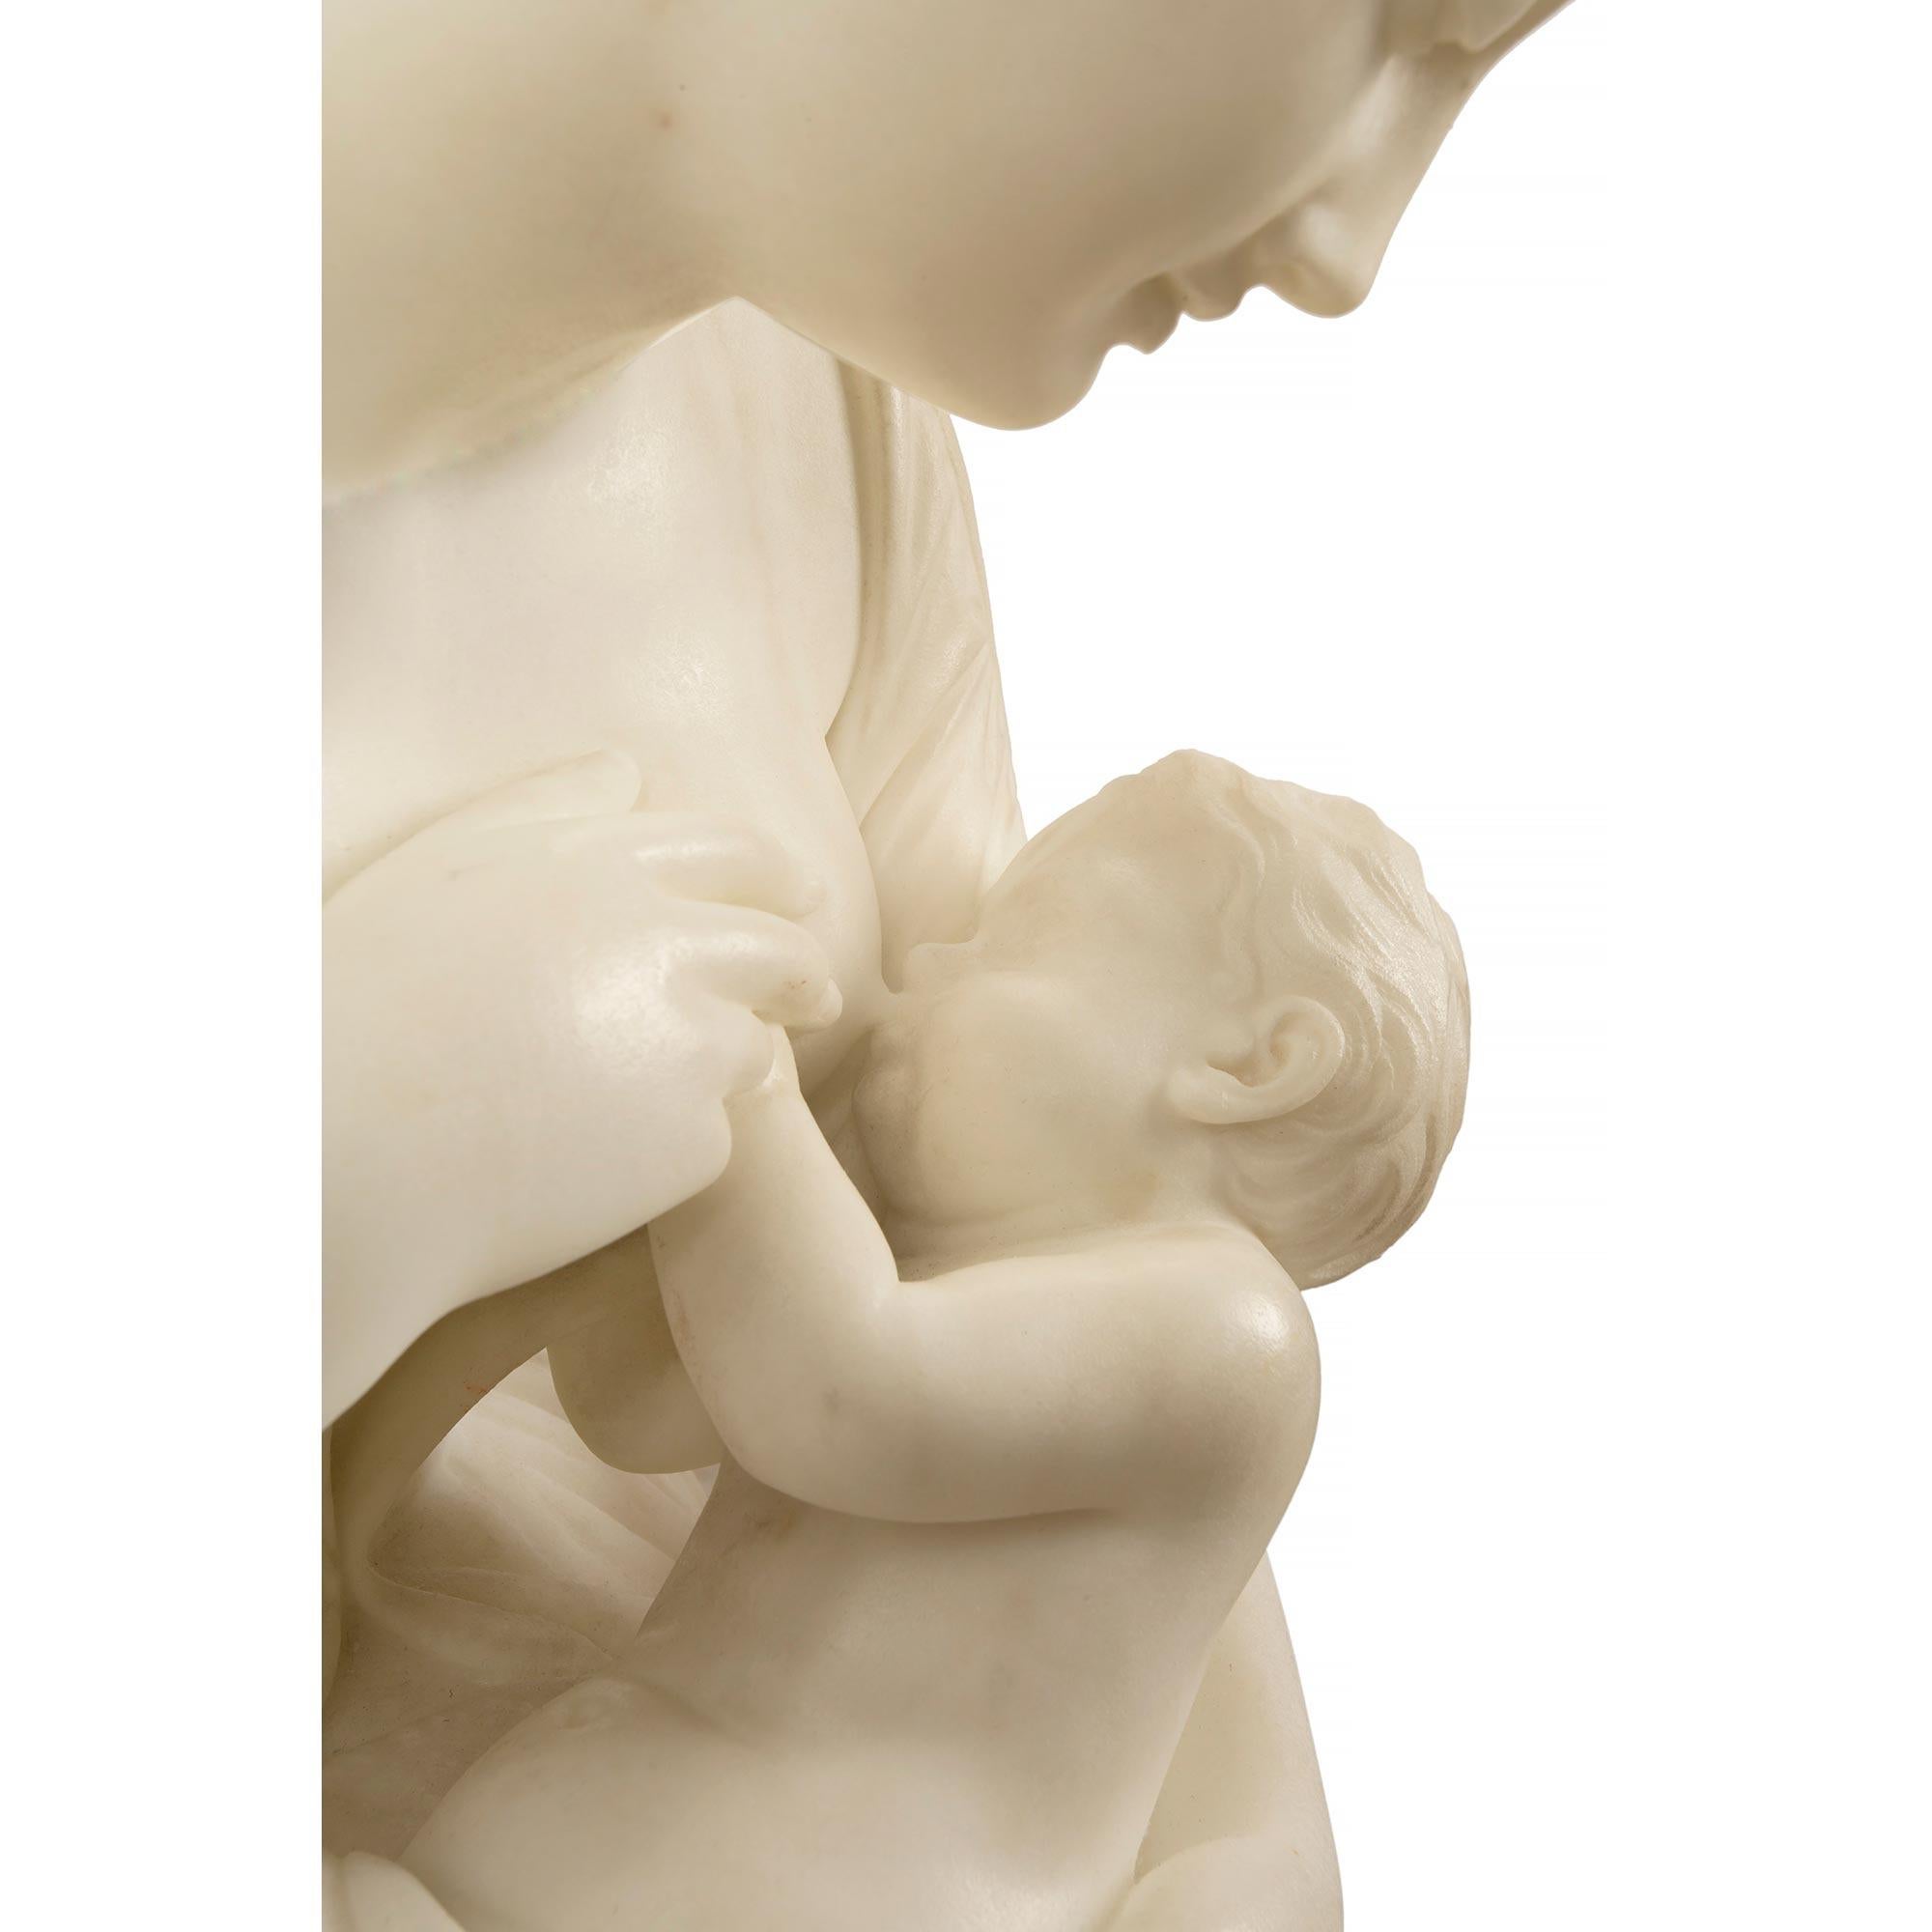 Italian 19th Century Carrara Marble Statue of Mother and Child, Signed Franchi For Sale 4